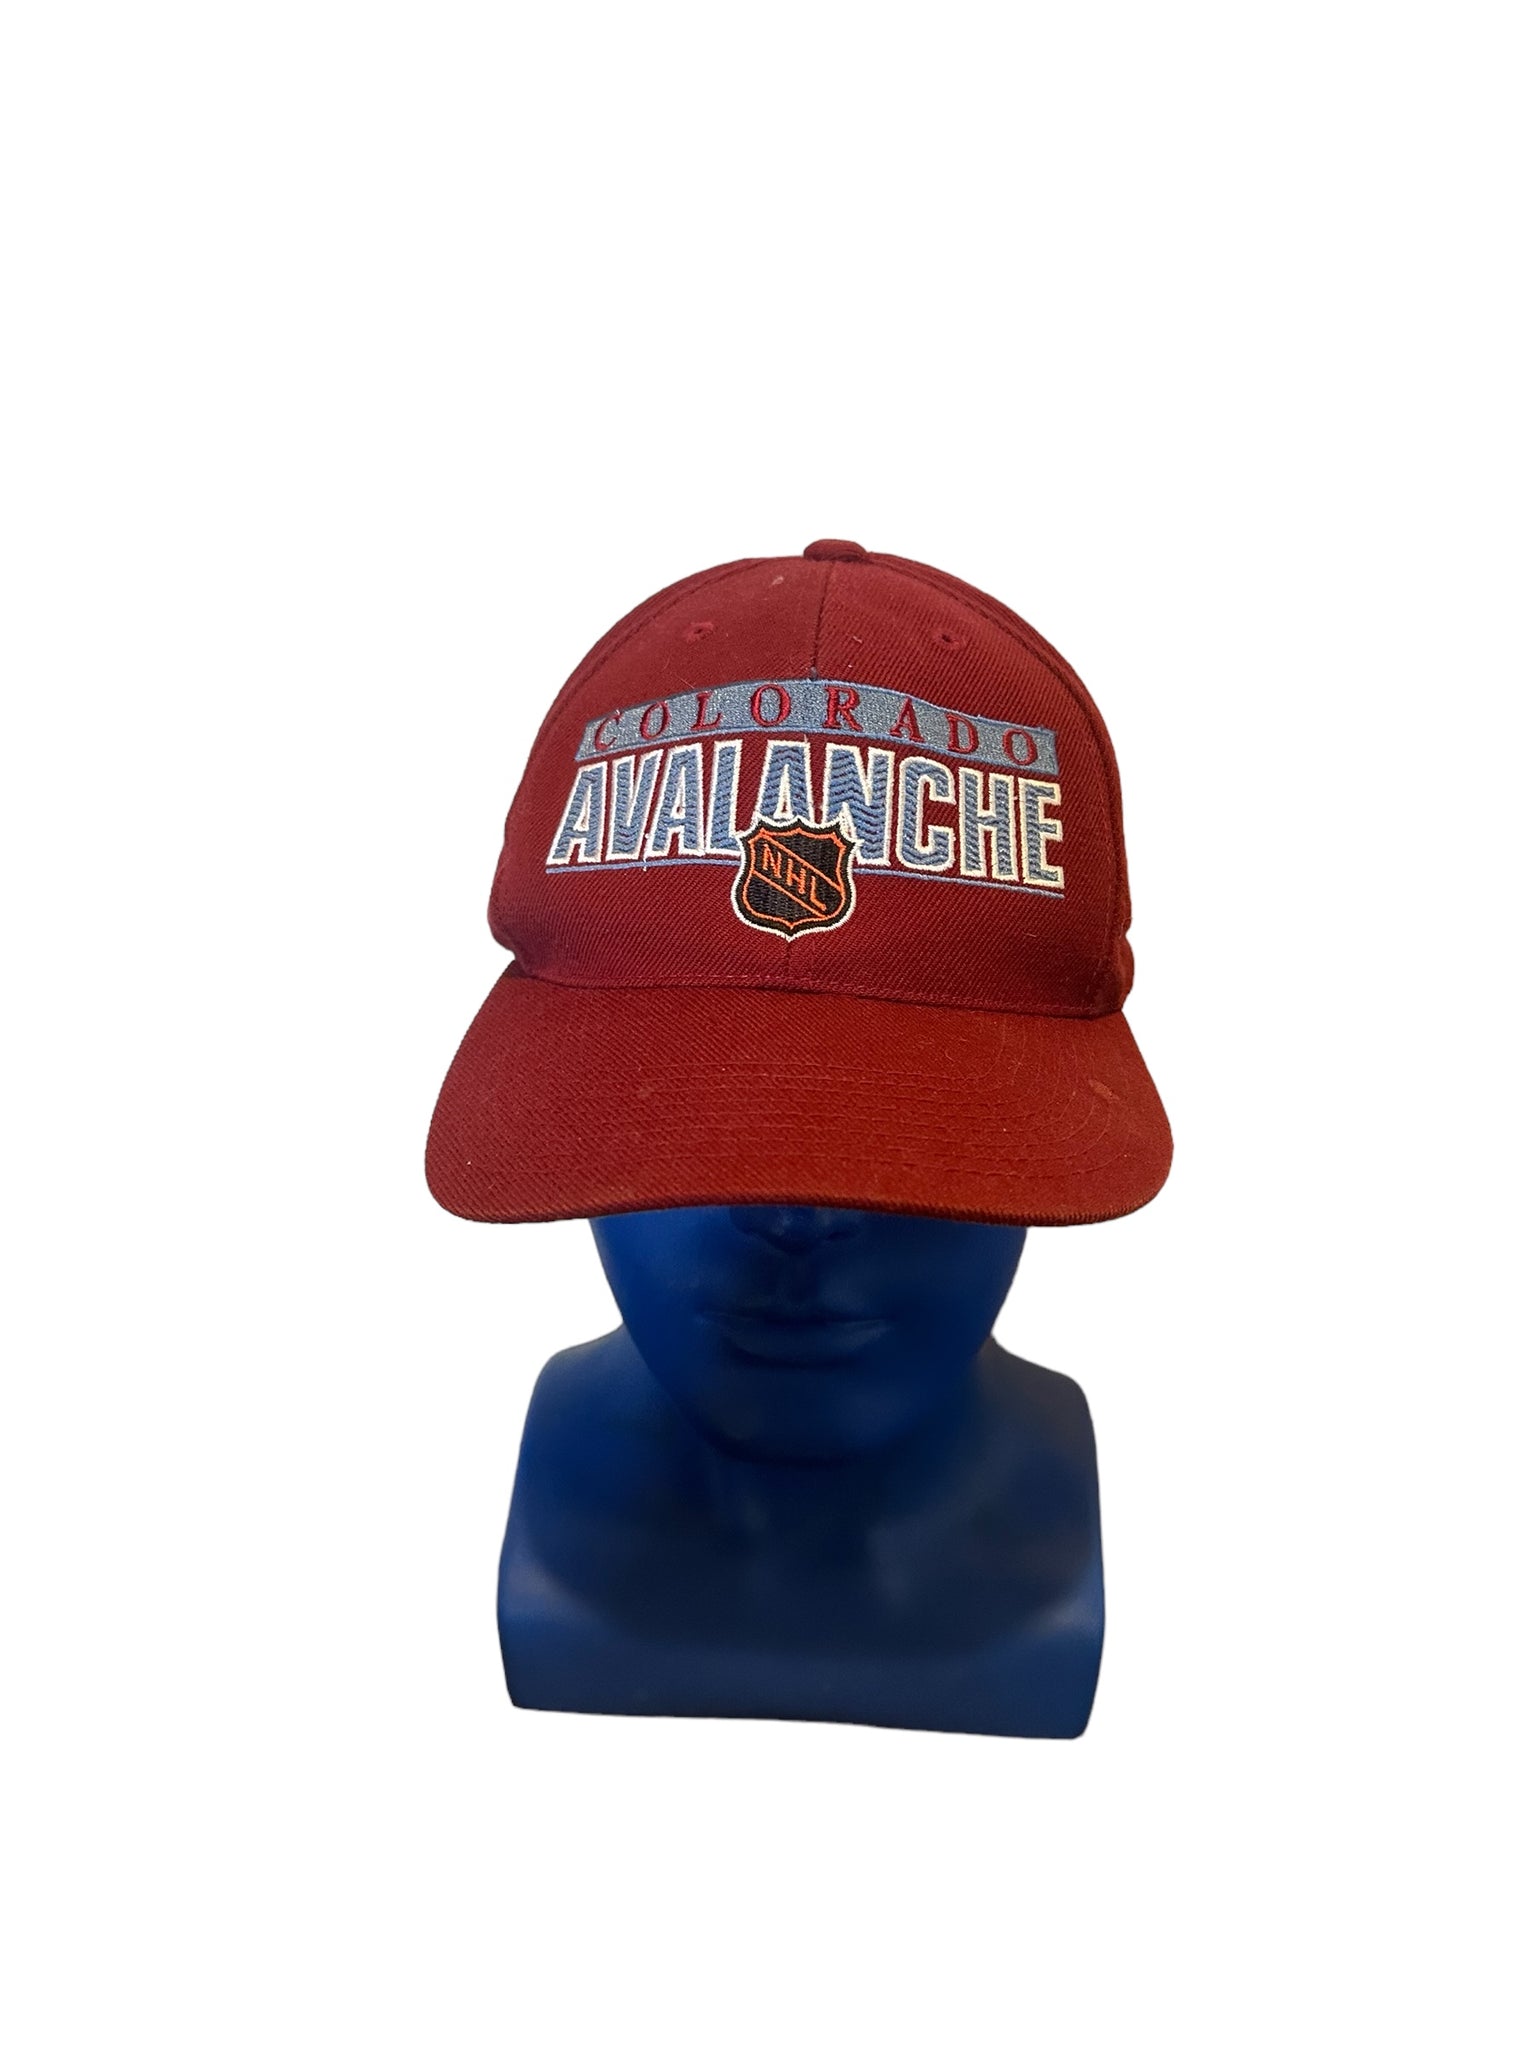 Vintage sports specialties center ice NHL colorado avalanche embroidered script snapback hat